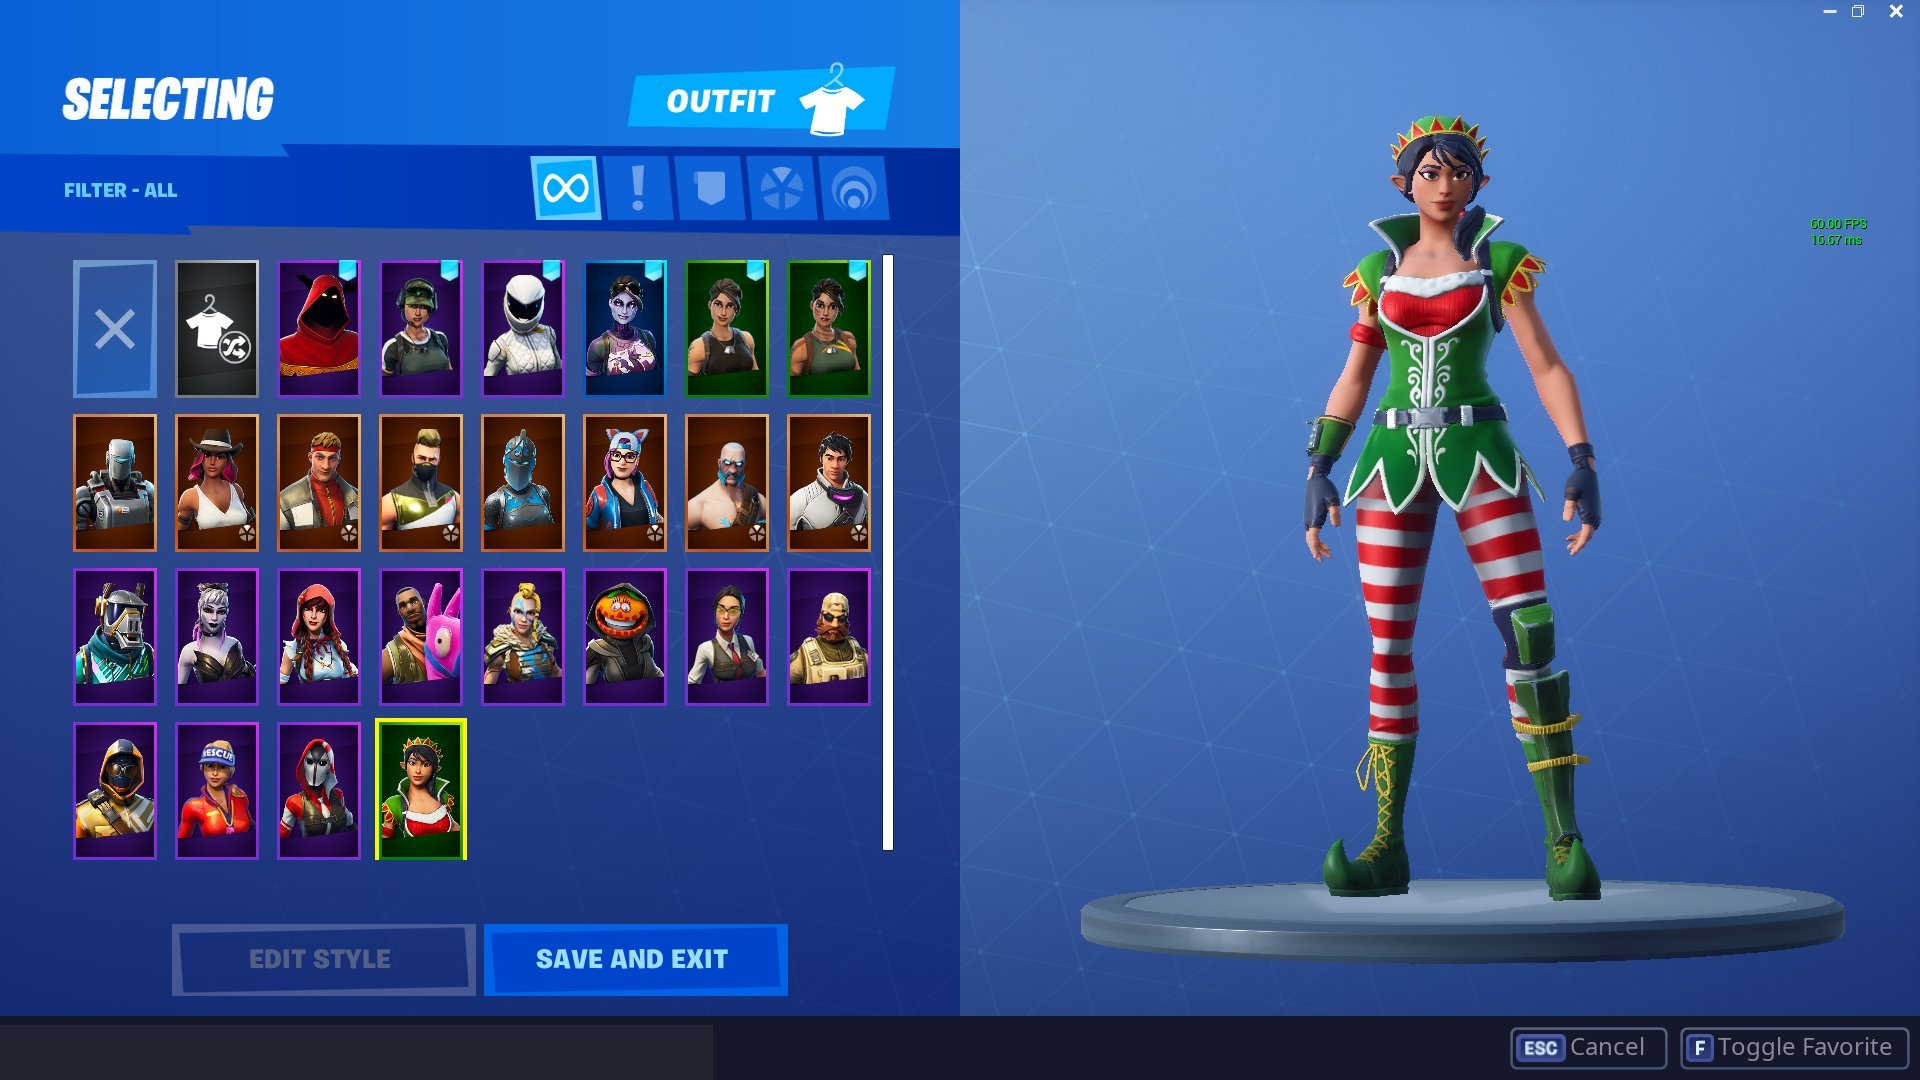 Free Download Fortnite Update 710 Leaked Skins Tinseltoes Frozen